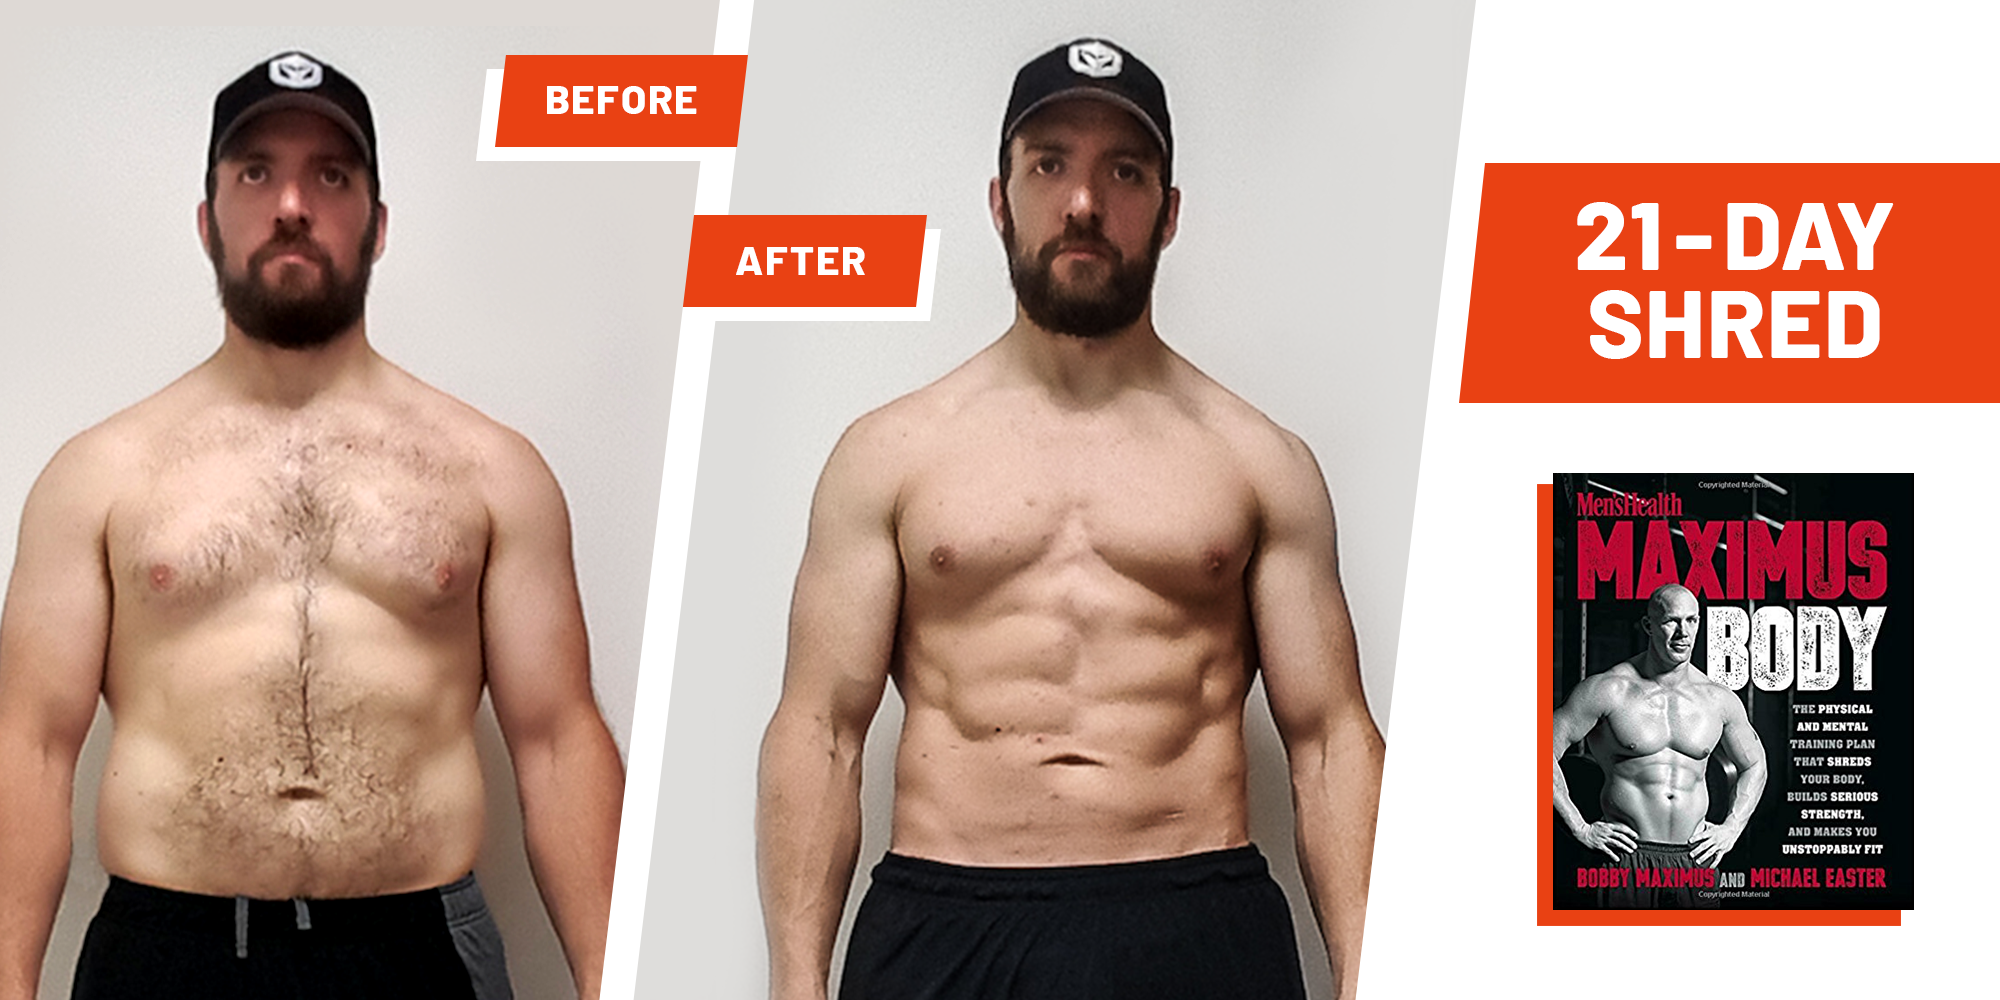 6 month workout plan to get ripped